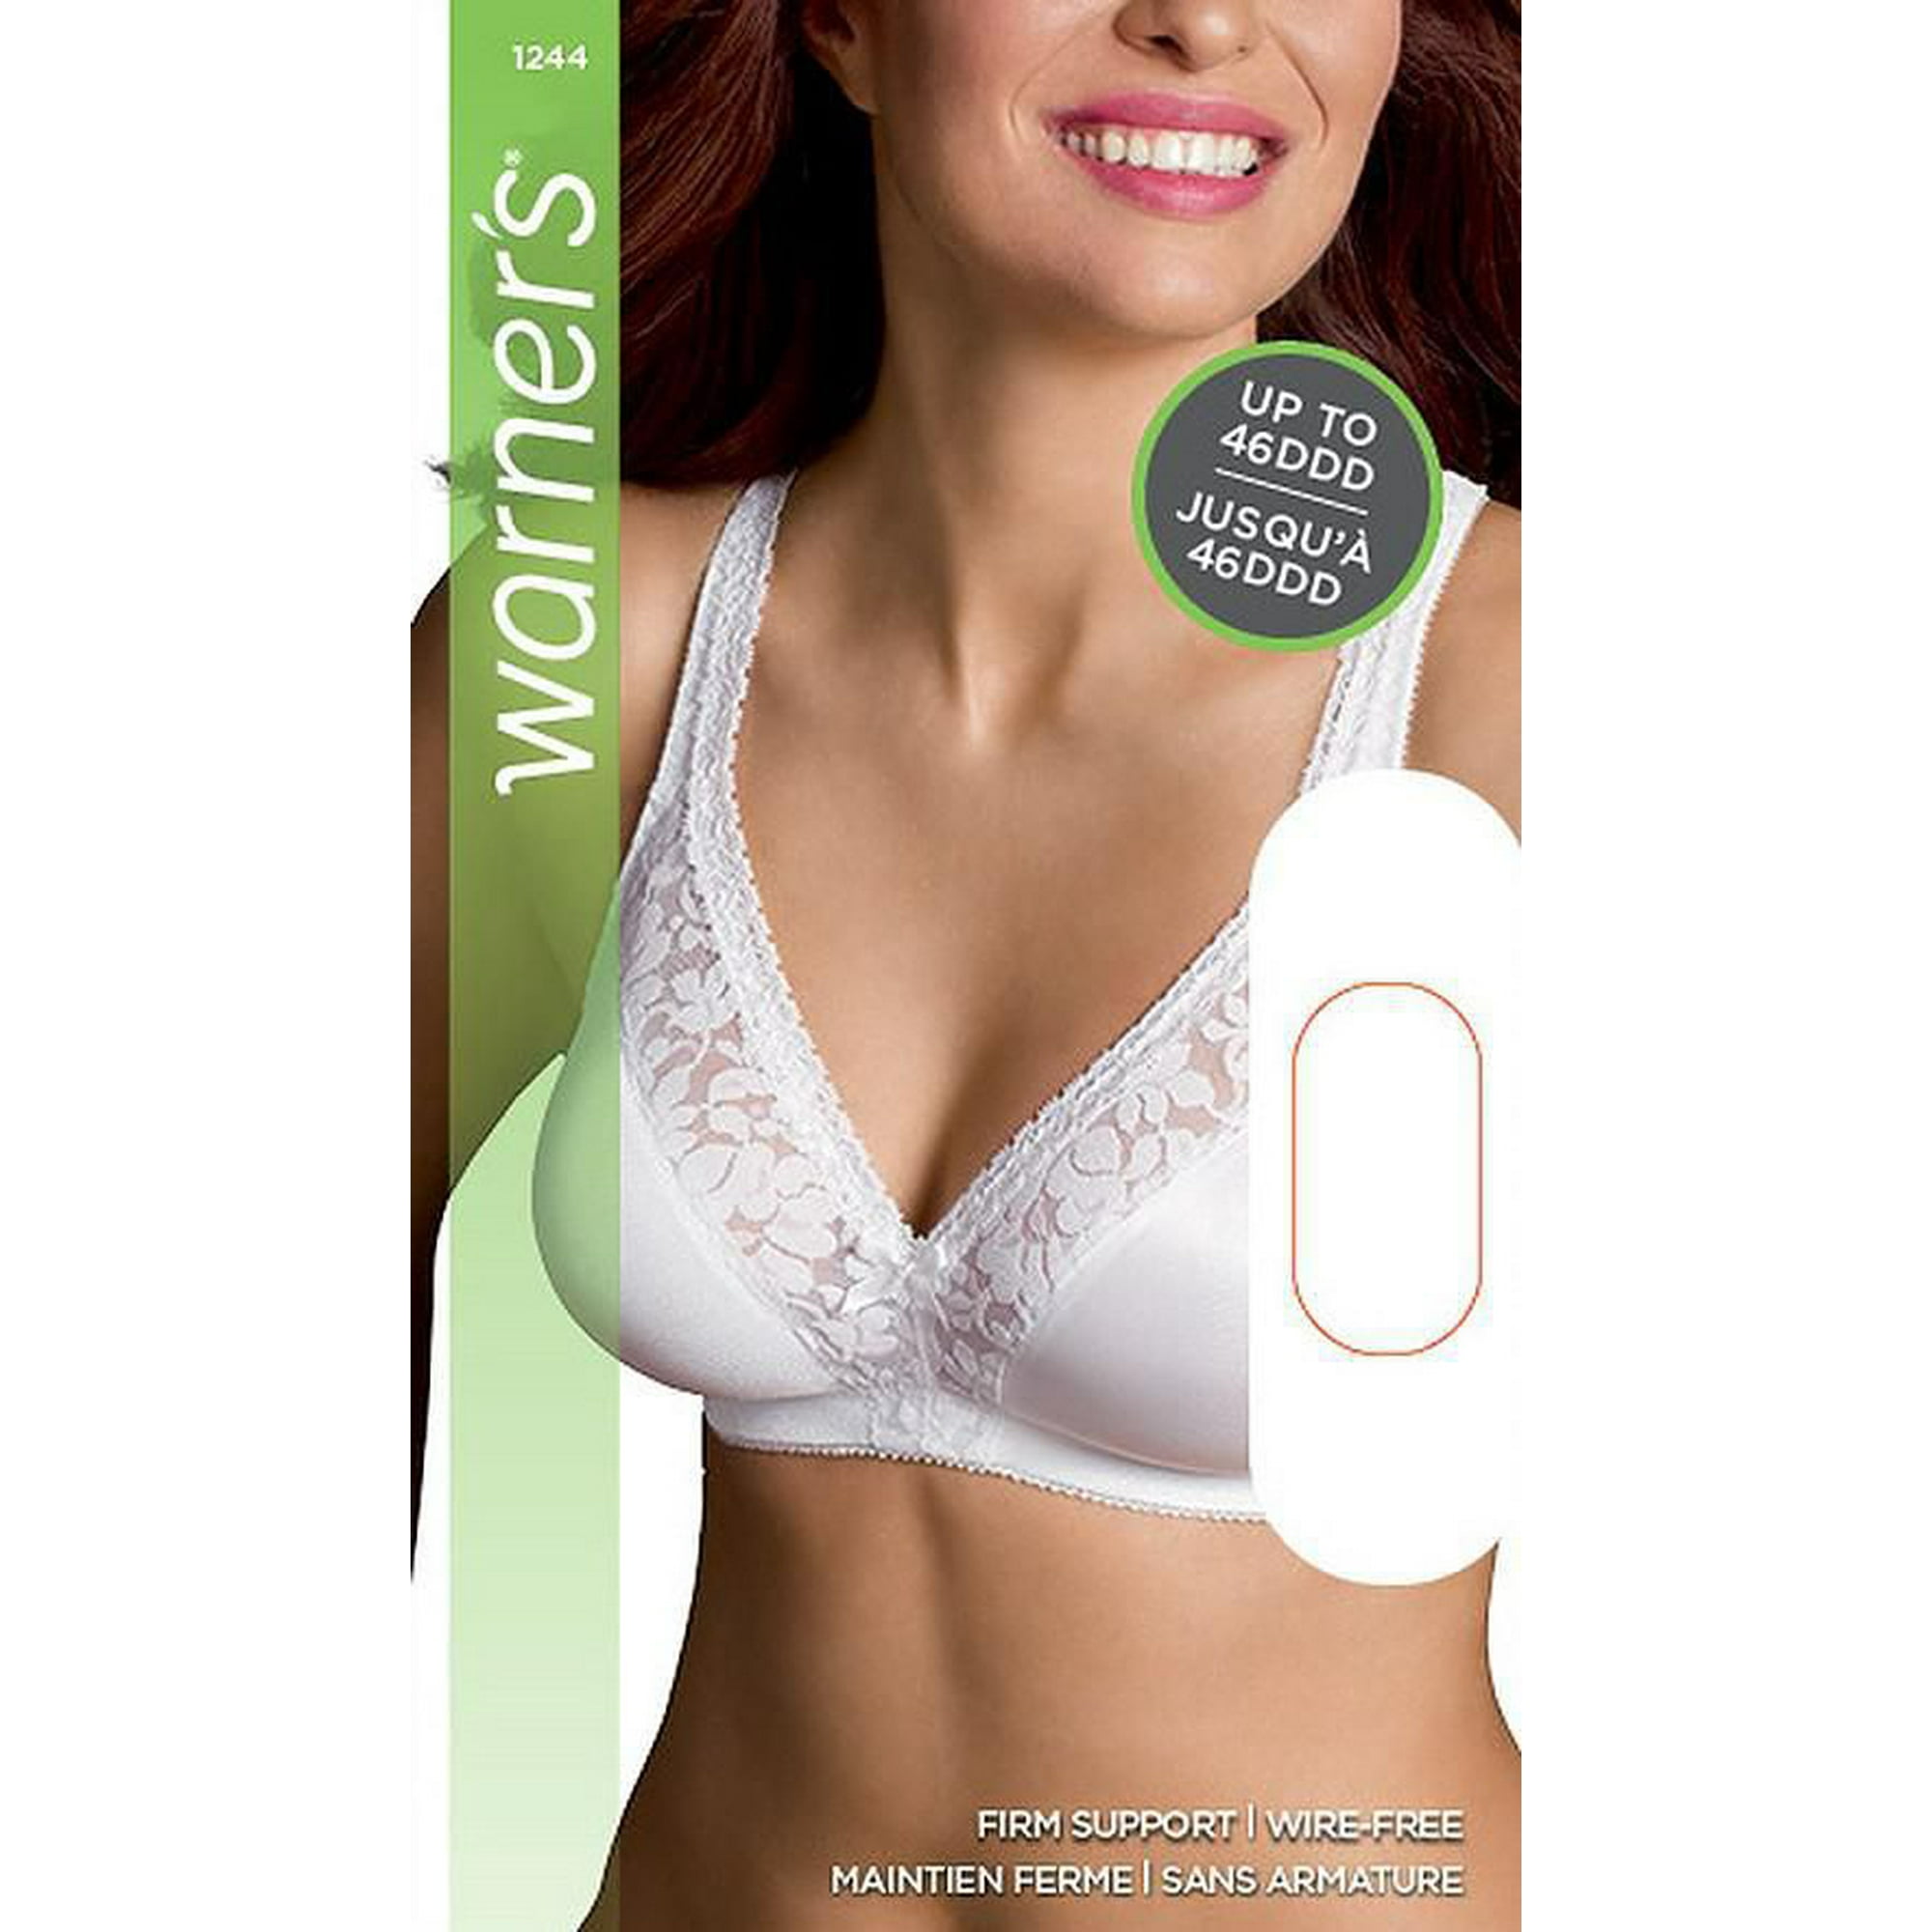 Buy DD-GG White Recycled Lace Comfort Full Cup Bra 42DD, Bras